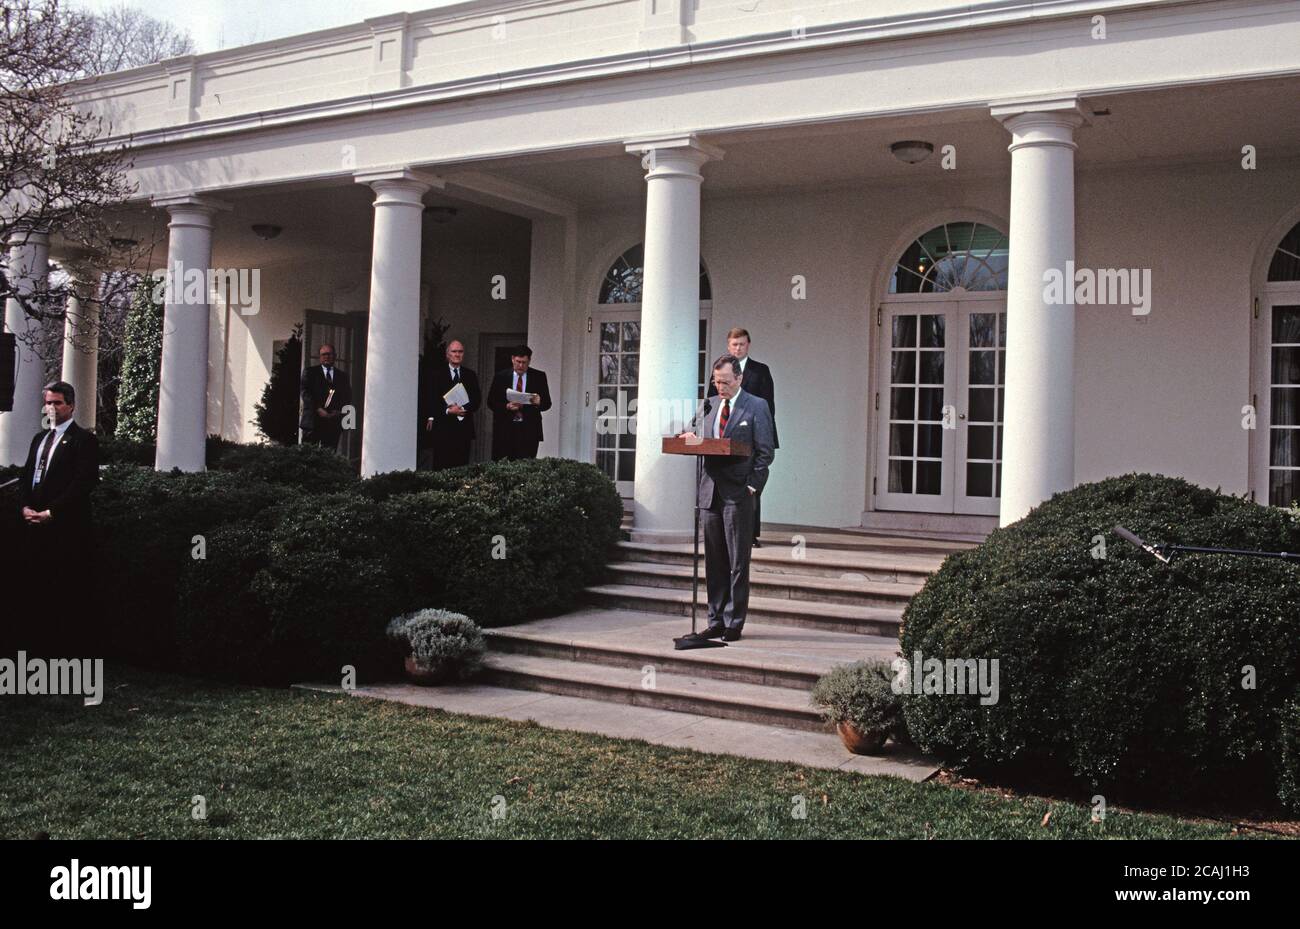 In this file photo, United States President George H.W. Bush reads a statement rejecting the proposed Soviet peace agreement to end the Gulf War with Iraq in the Rose Garden of the White House in Washington, D.C. on February 22, 1991.  Also visible in the photo are White House Press Secretary Marlin Fitzwater, National Security Advisor Brent Scowcroft, White House Chief of Staff John Sununu, and U.S. Vice President Dan Quayle.Credit: Howard L. Sachs / CNP / MediaPunch Stock Photo